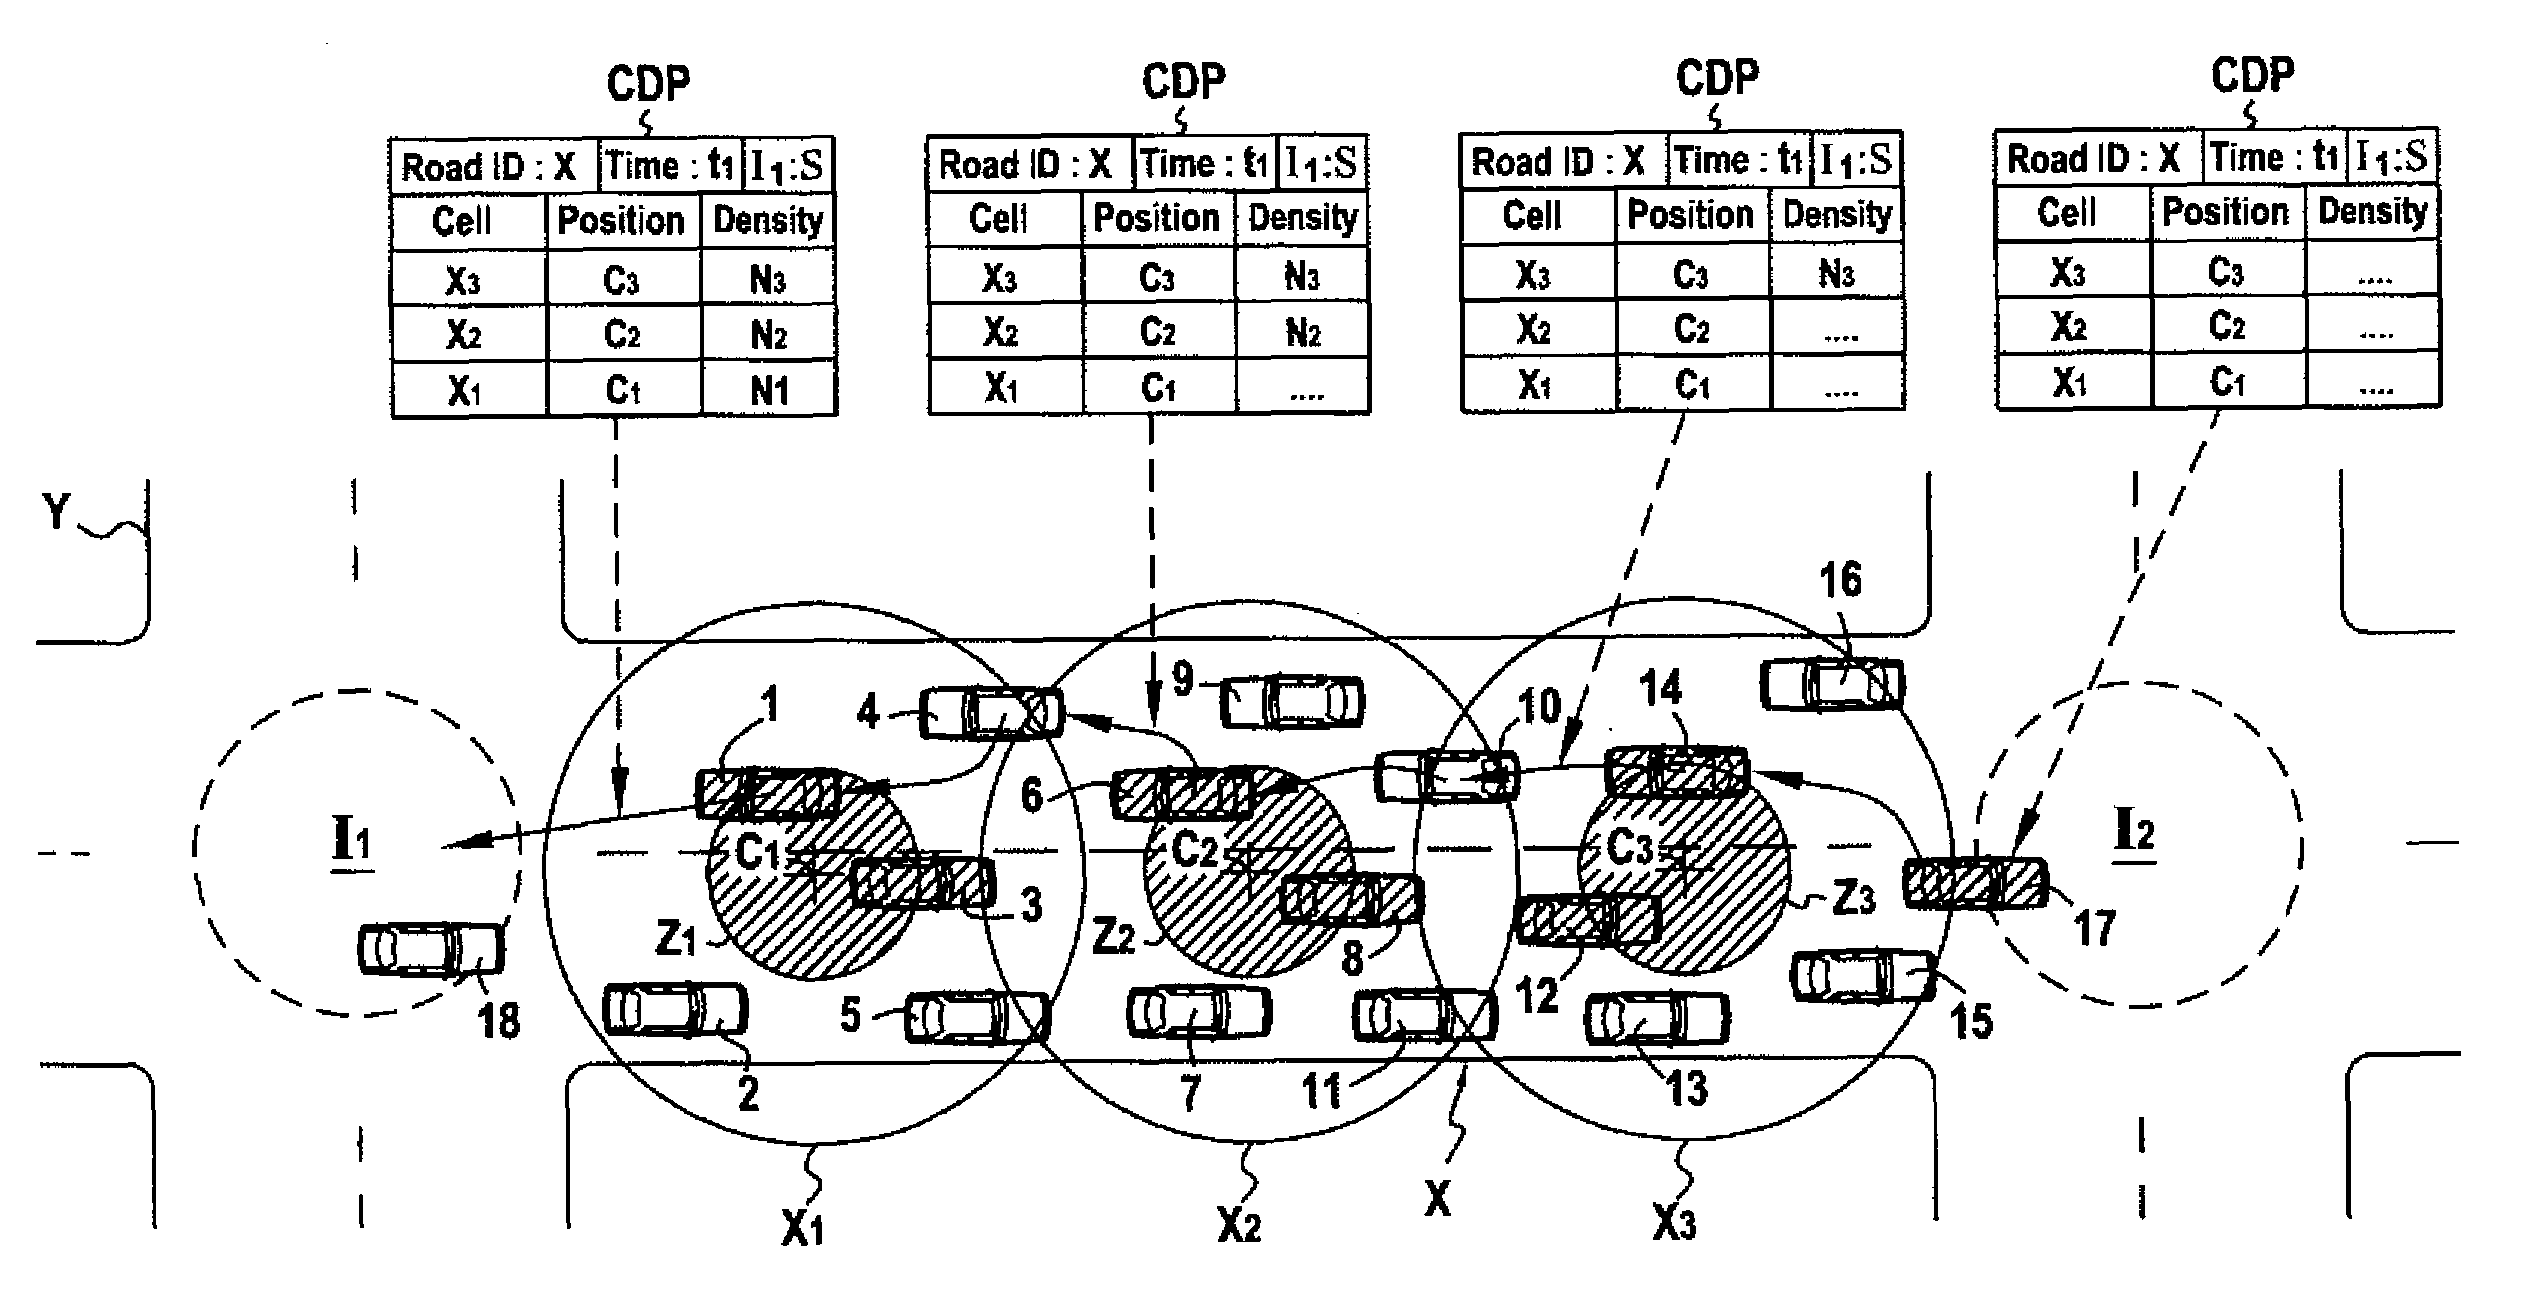 Method for estimating and signalling the density of mobile nodes in a road network